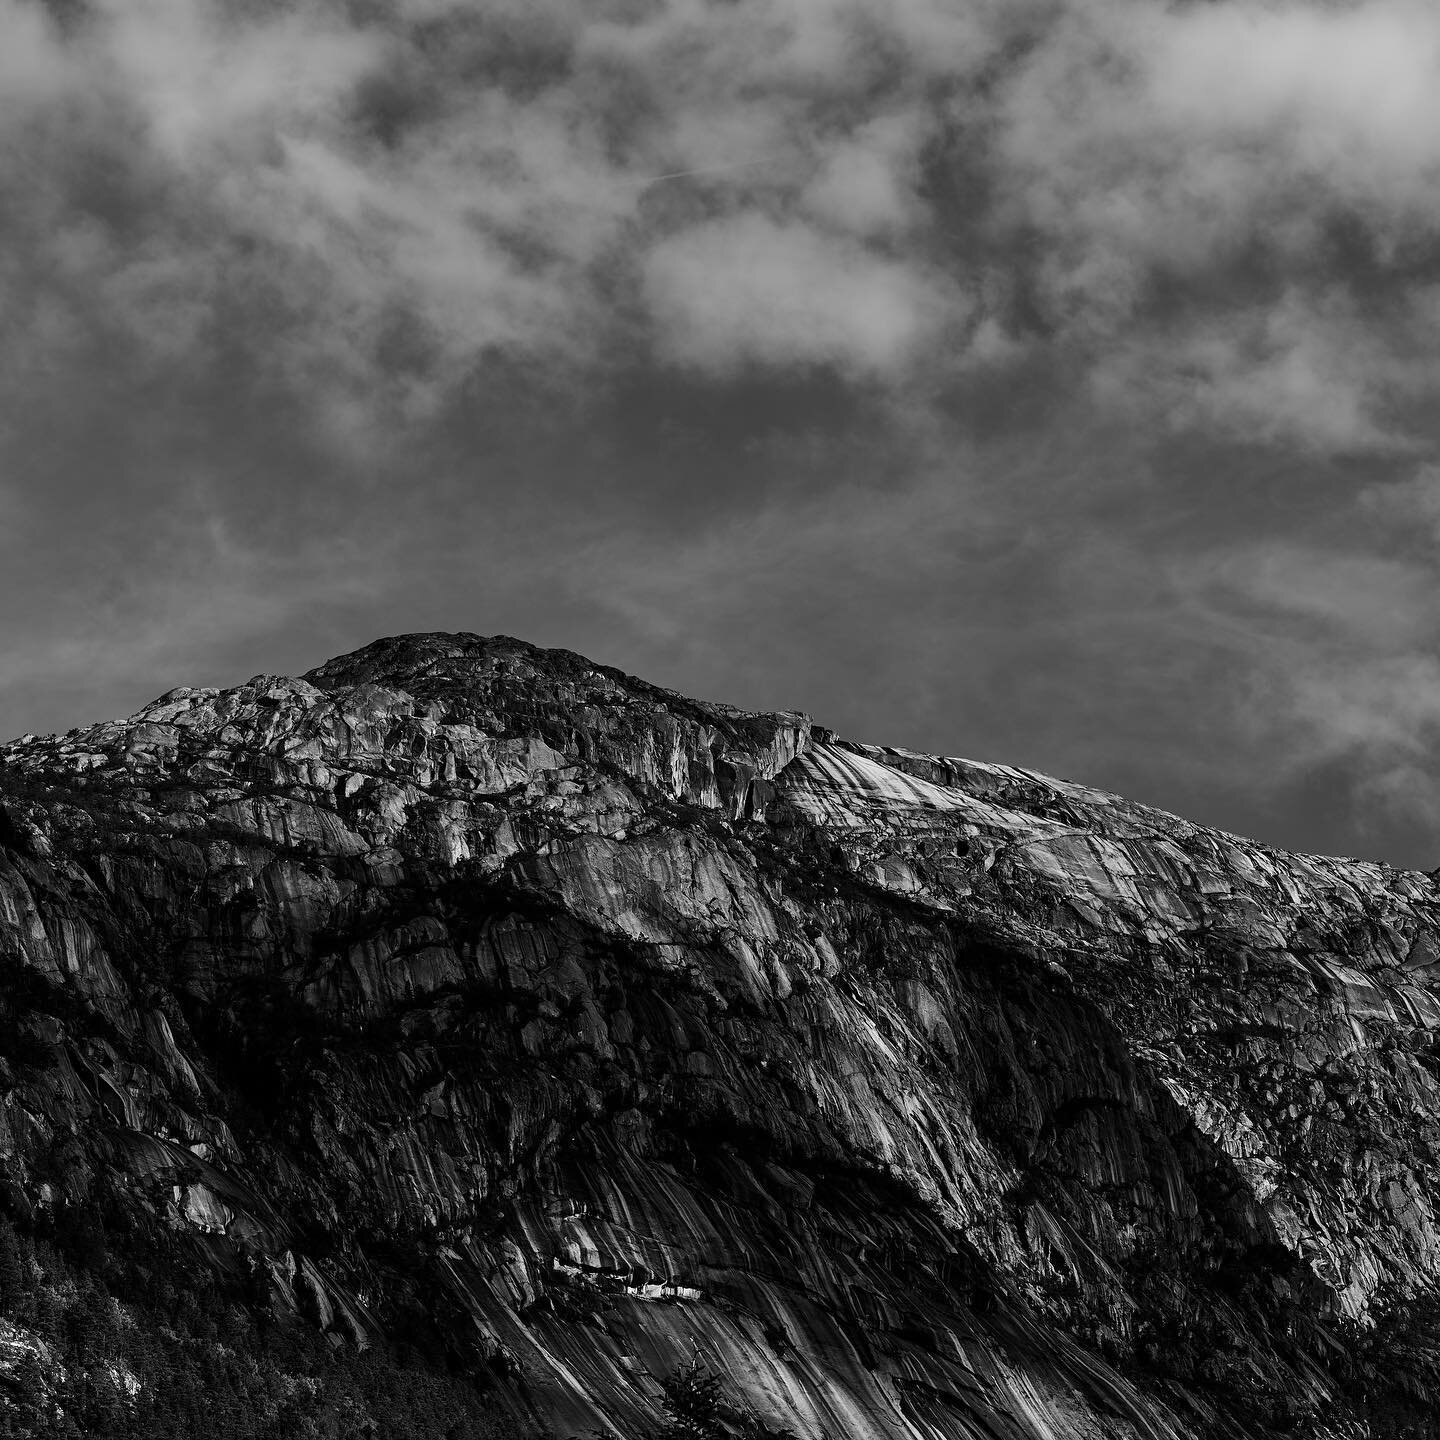 On the west coast of Norway, the mountains are incredible!

#norway #voss #roadtrip #bw #blackandwhite #mountains #blackandwhitephotography #leicasl2s #90mm